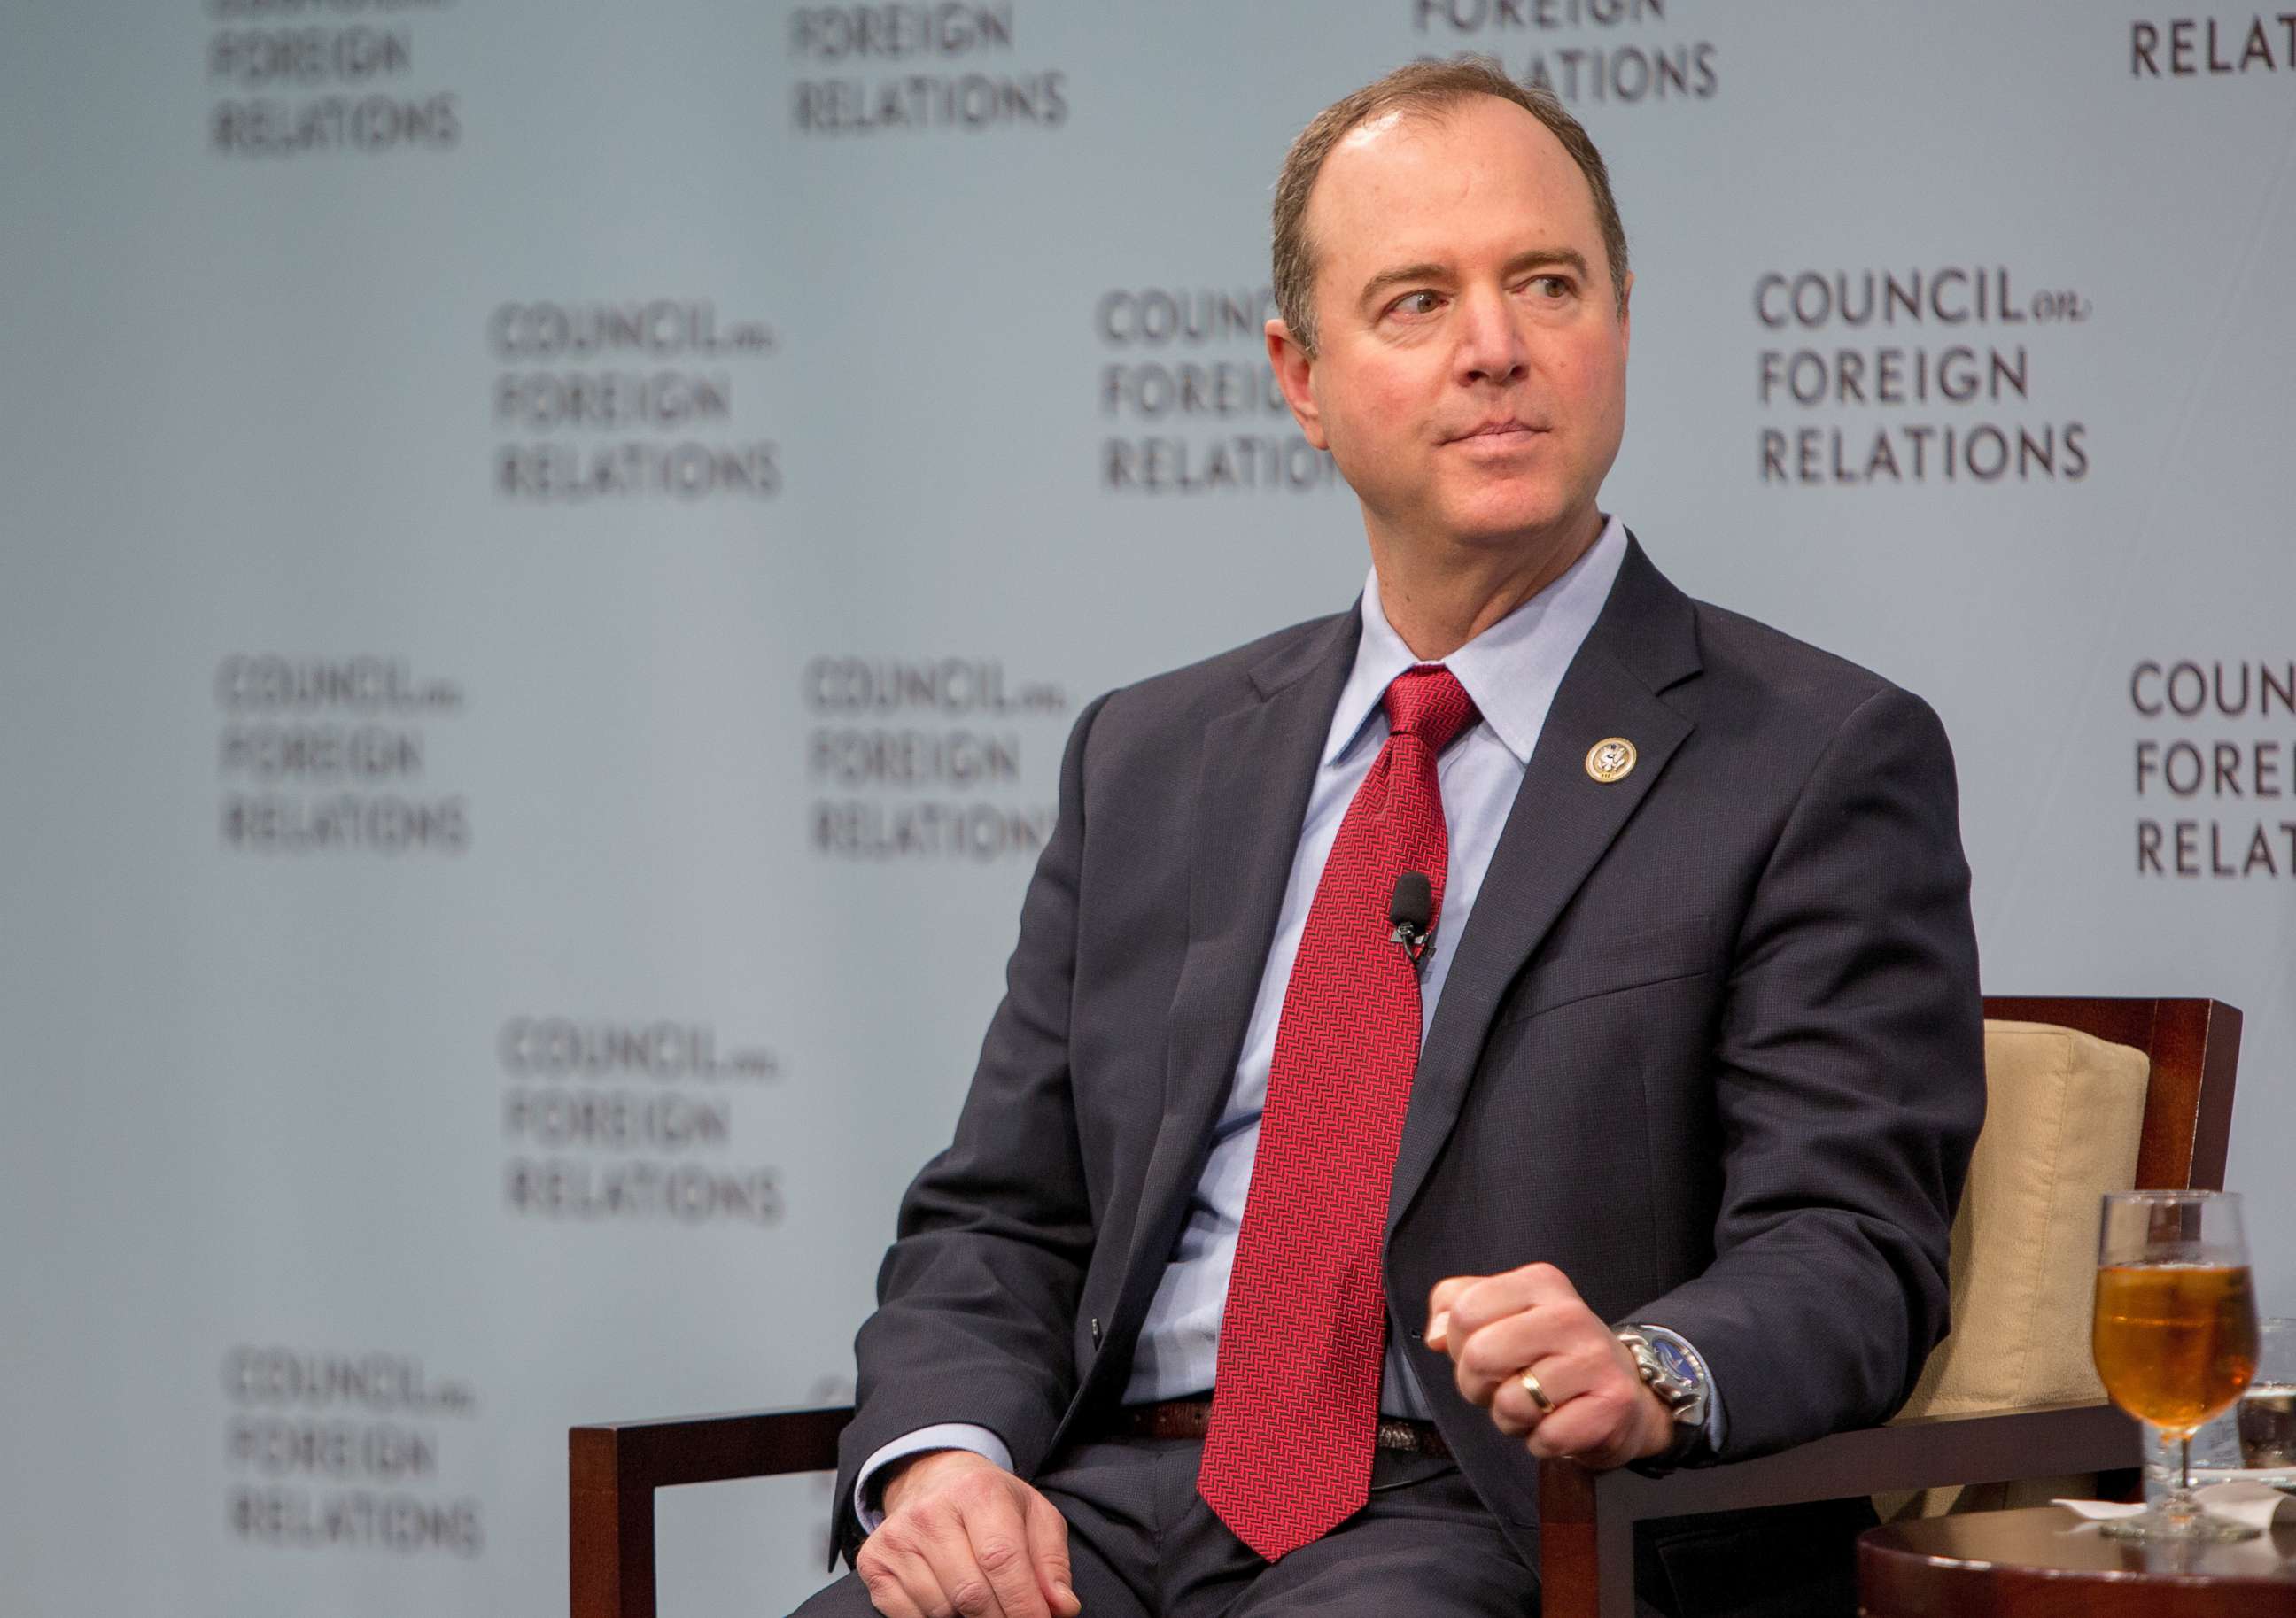 PHOTO: House Intelligence Ranking Member Adam Schiff speaks at the Council on Foreign Relations, Feb. 16, 2018 in Washington, D.C.